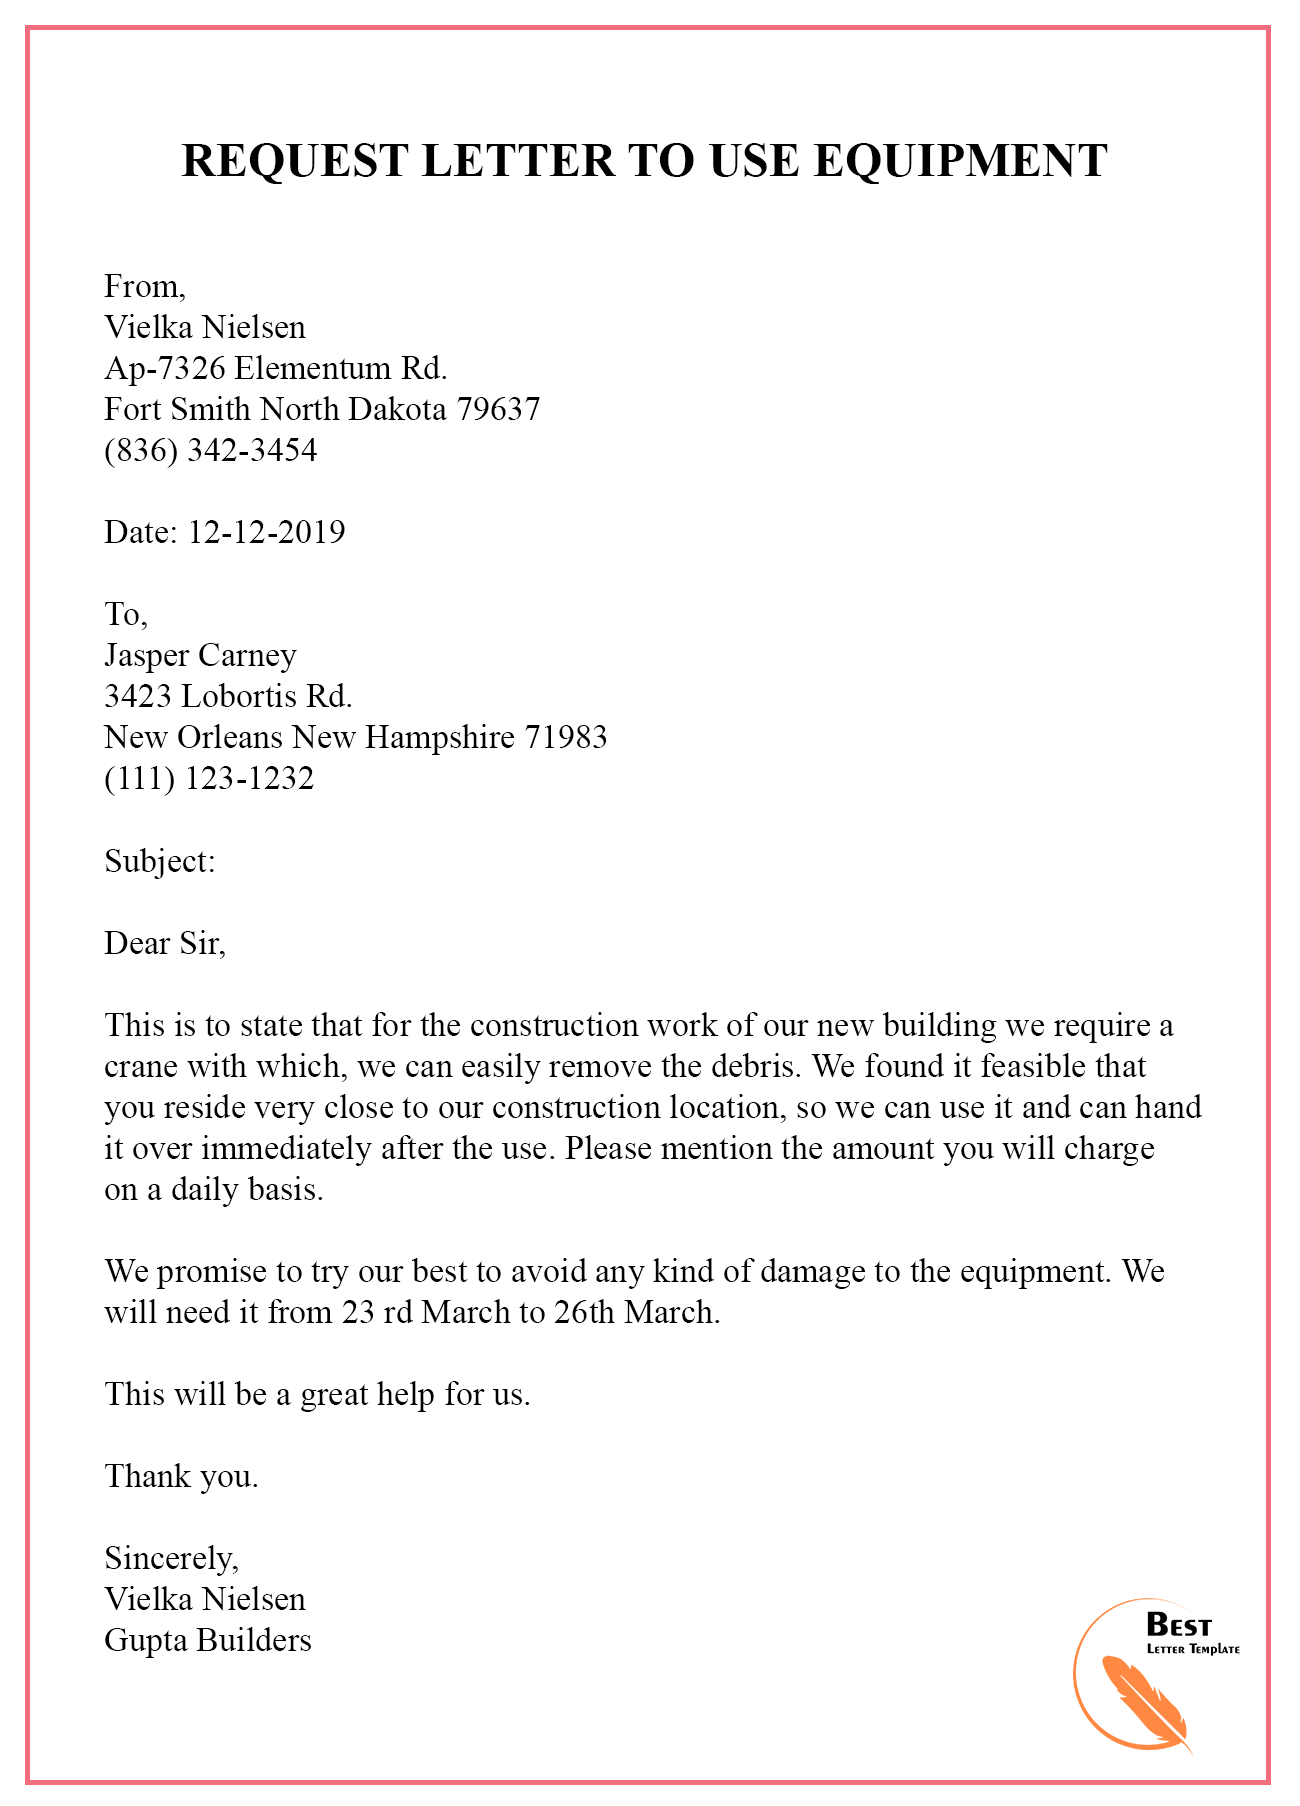 REQUEST LETTER FOR PERMISSION TO USE EQUIPMENT